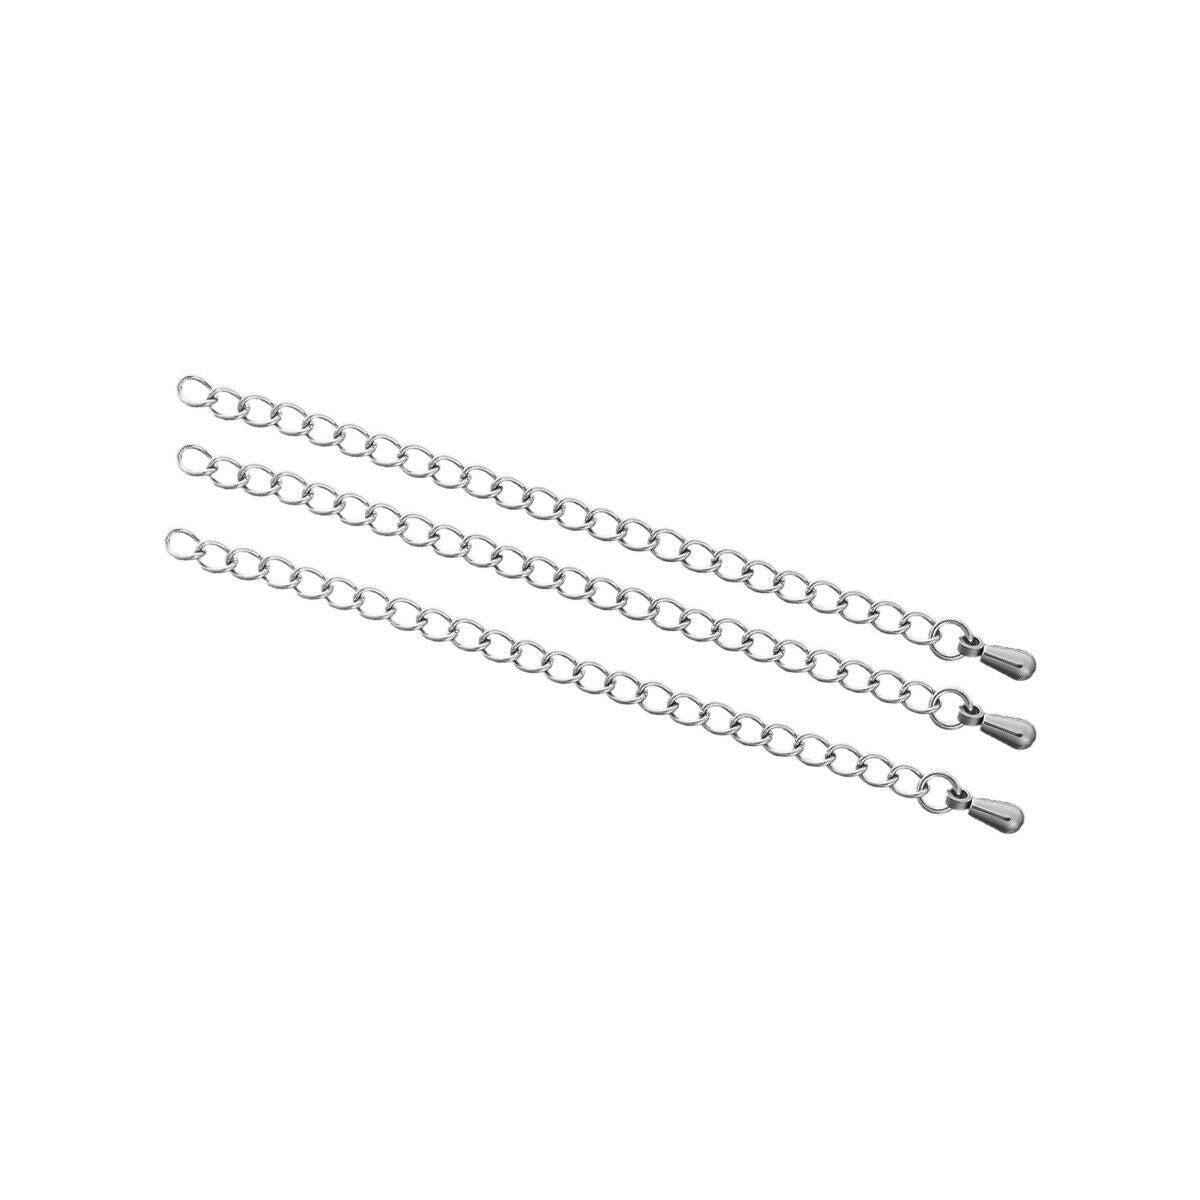 5 Stainless Steel 8cm Long Extender Chain For Jewelry Necklace Bracelet Silver Tone Drop